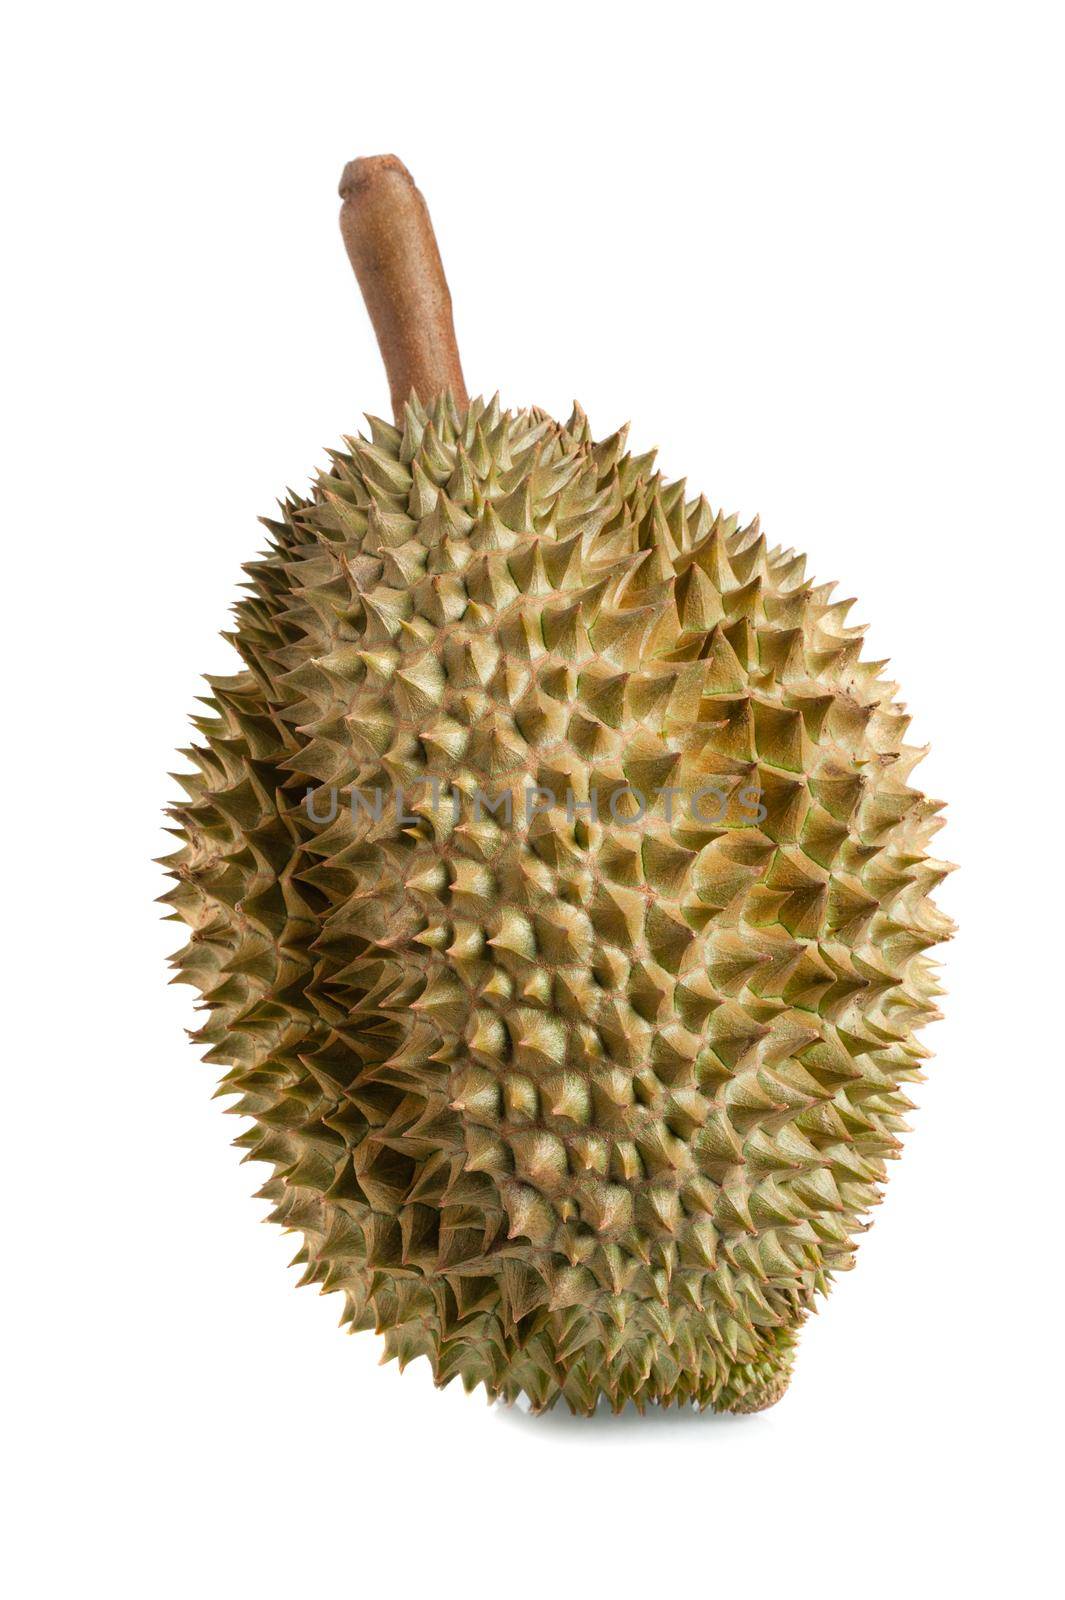 Mon Thong durian fruit by norgal